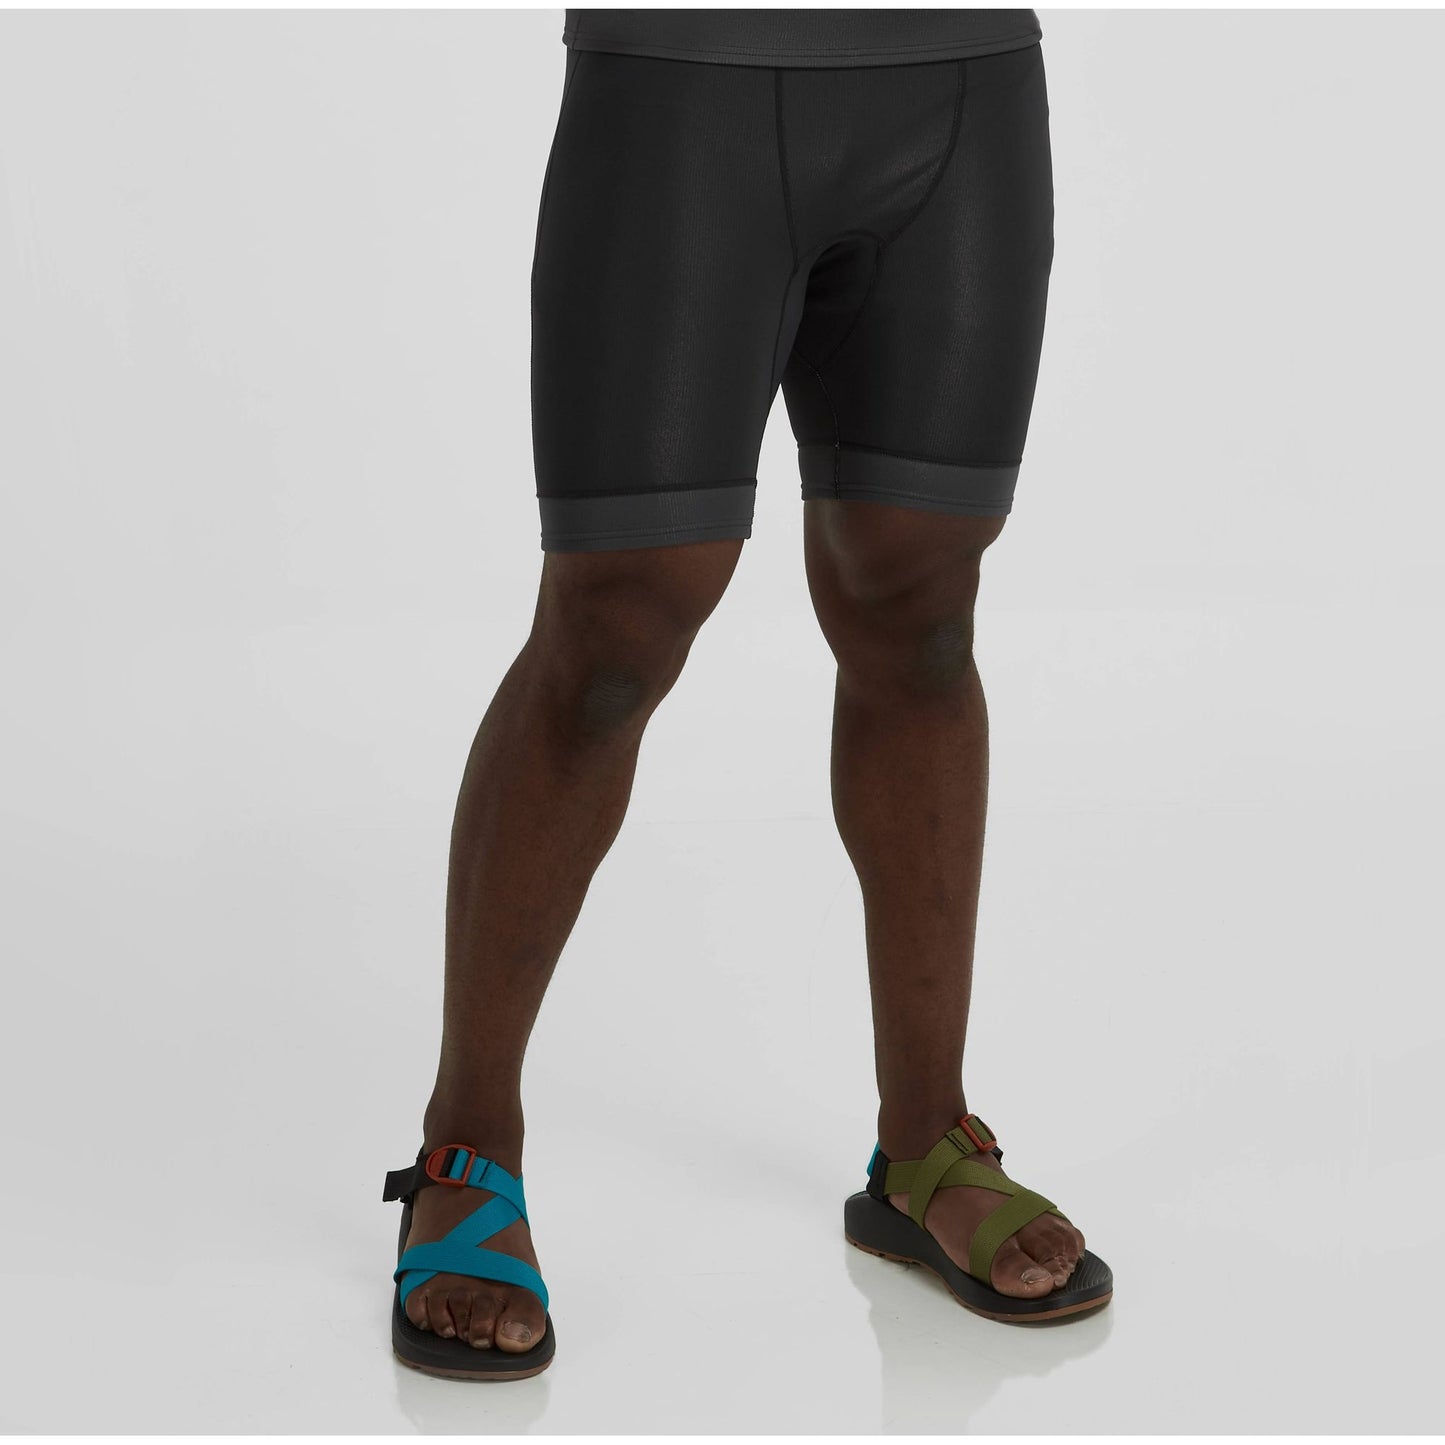 A man wearing black shorts and sandals in his NRS Hydroskin 0.5 Shorts - Men's, a versatile insulating short that is an essential part of any layering arsenal.